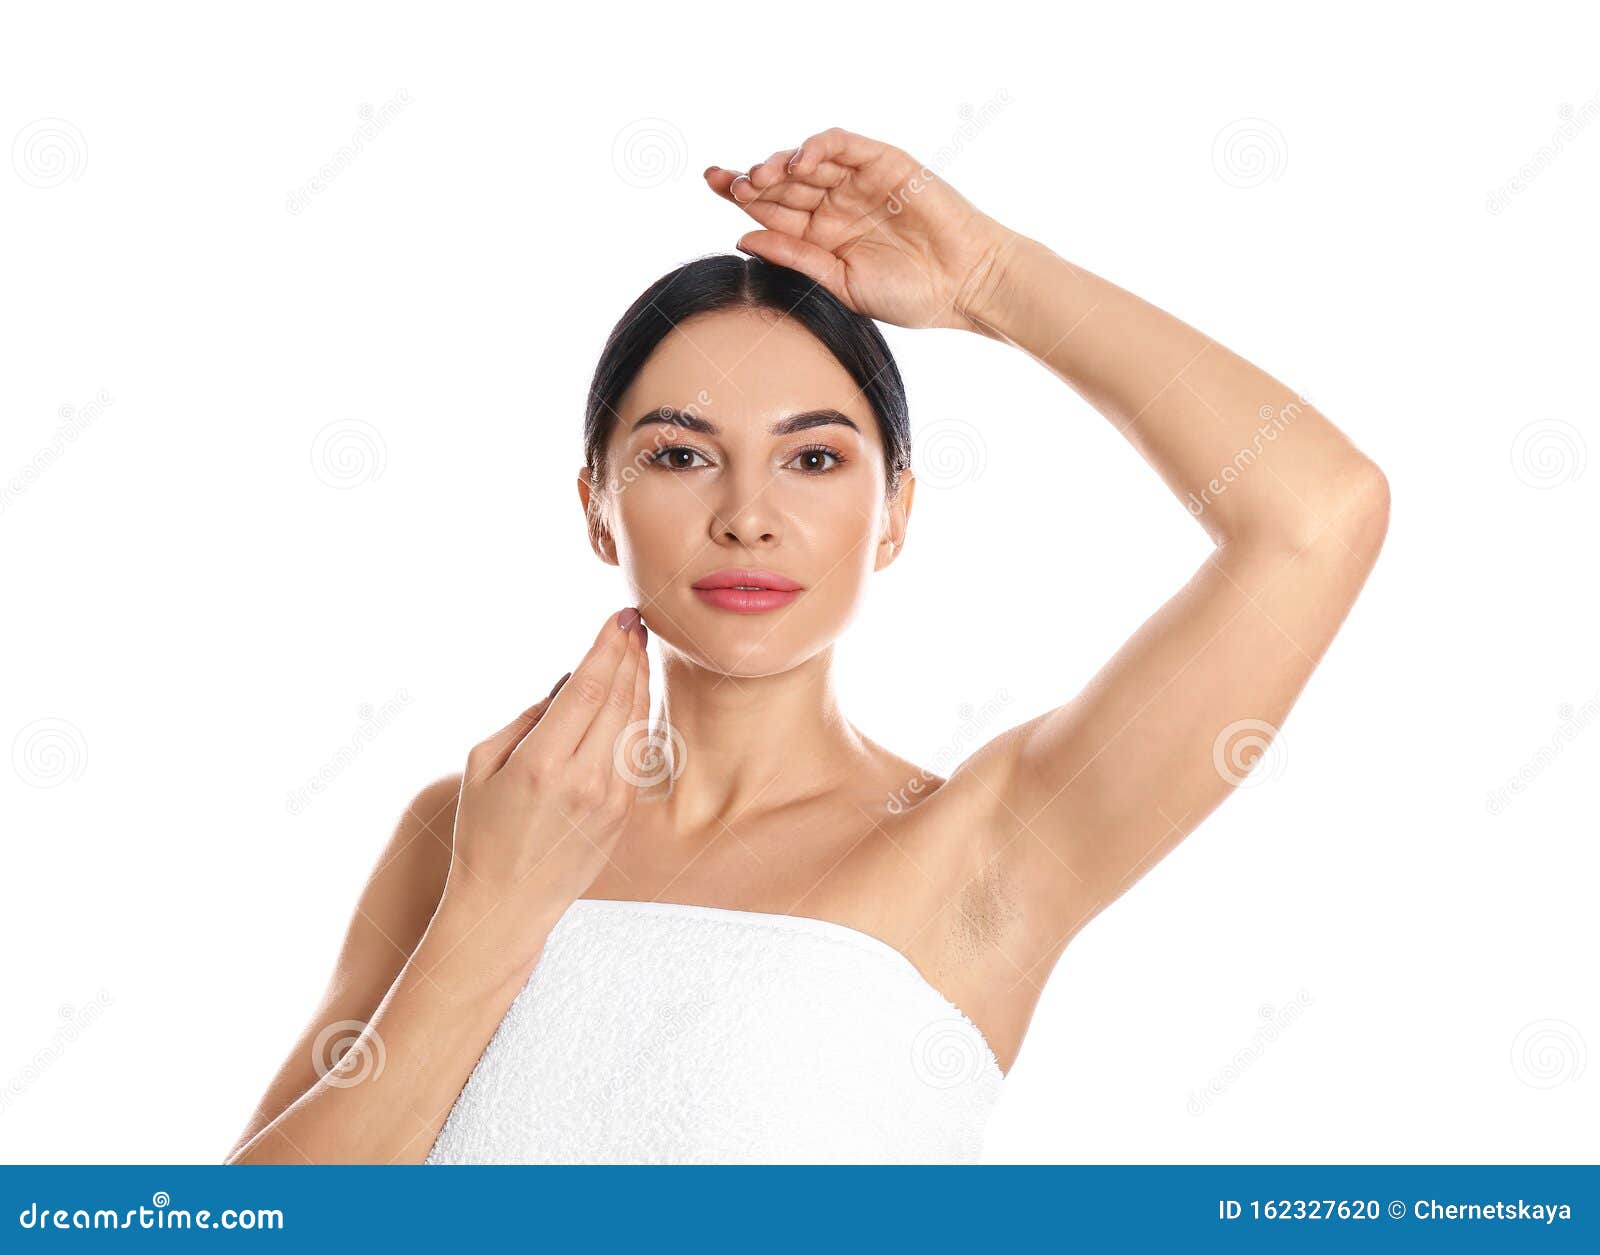 young woman showing hairy armpit on white. epilation procedure